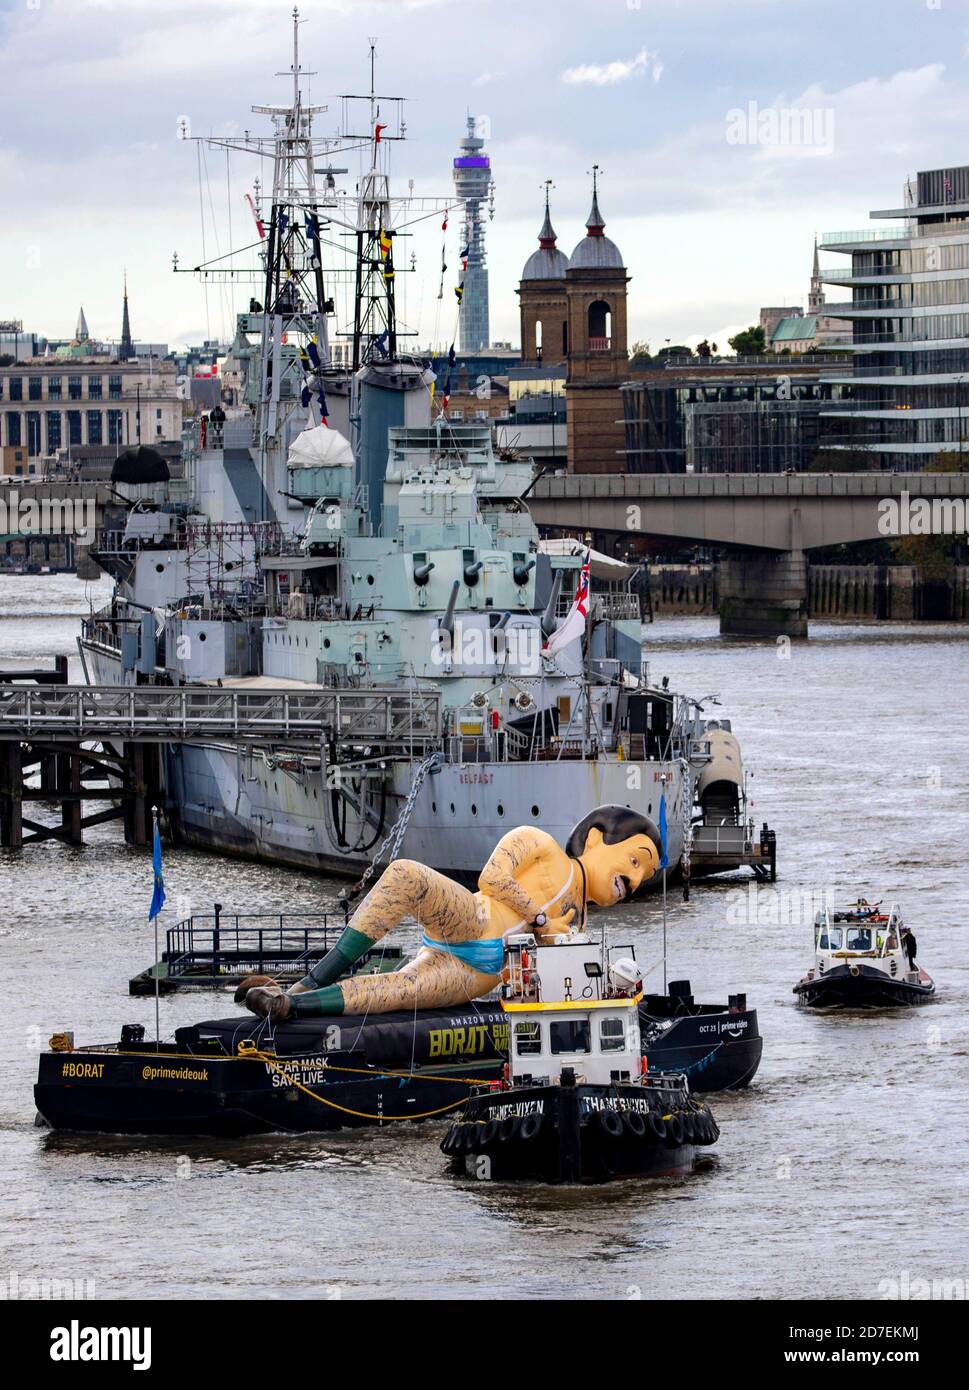 pic shows:  Borat inflatable goes down the Thames in London to promote Borat 2  HMS Belfast     Picture by Gavin Rodgers/ Pixel8000 Stock Photo